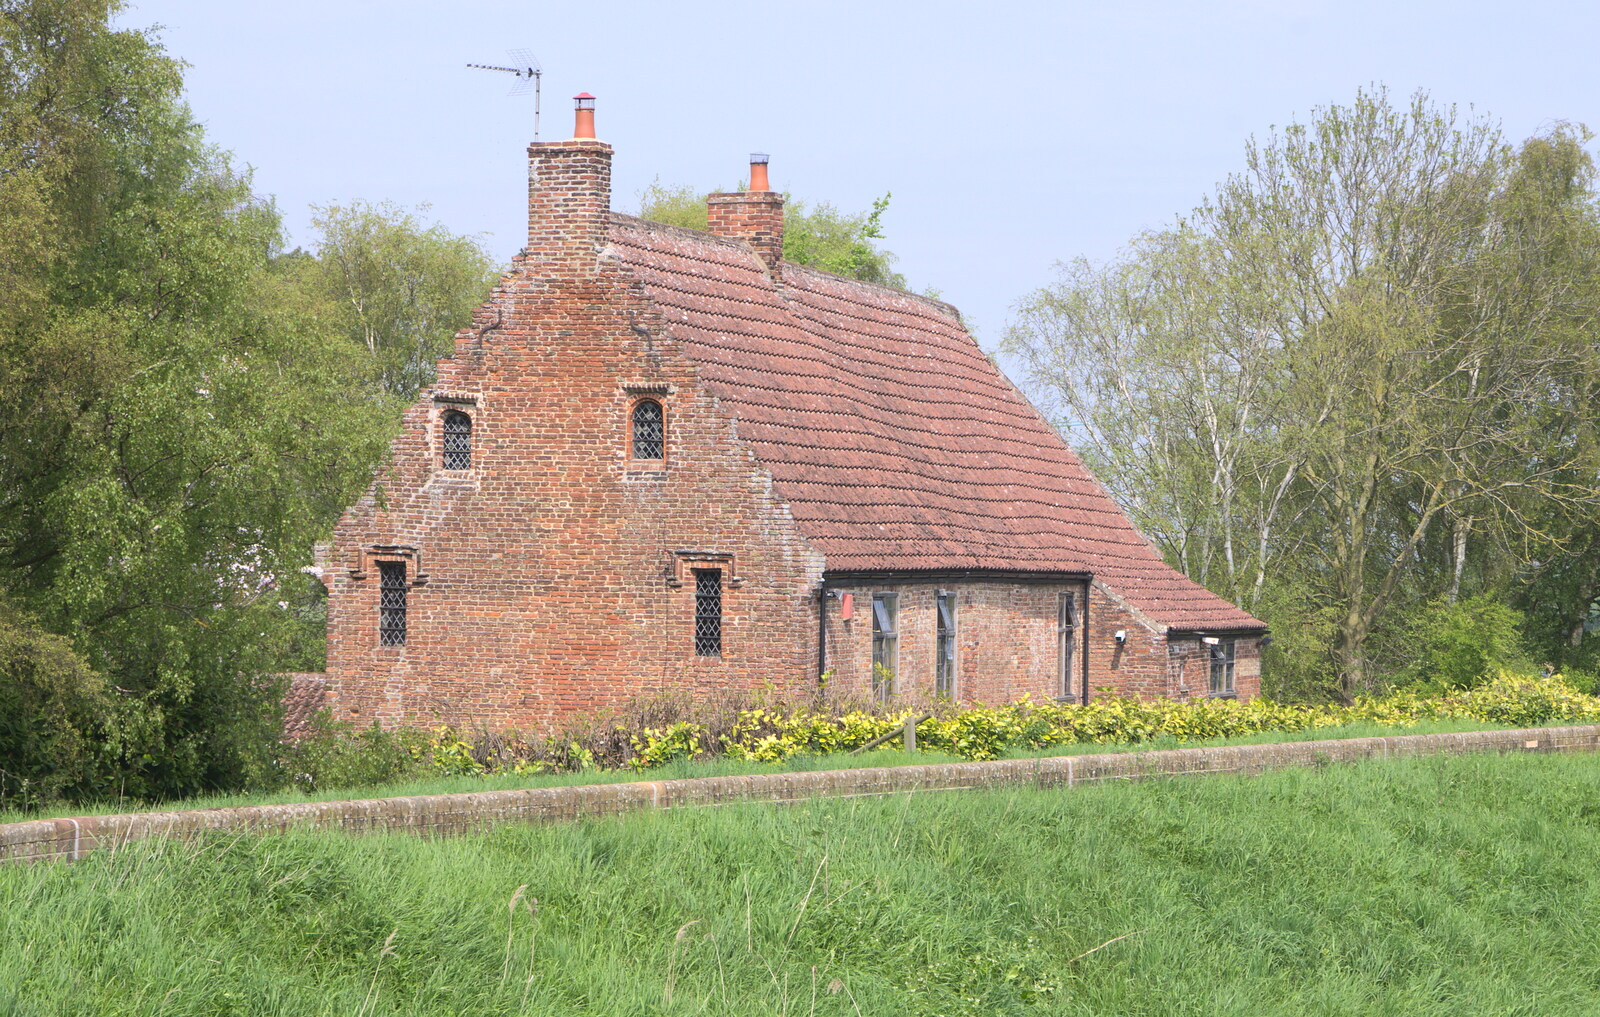 An old brick building from The BSCC Cycling Weekender, Outwell, West Norfolk - 7th May 2016